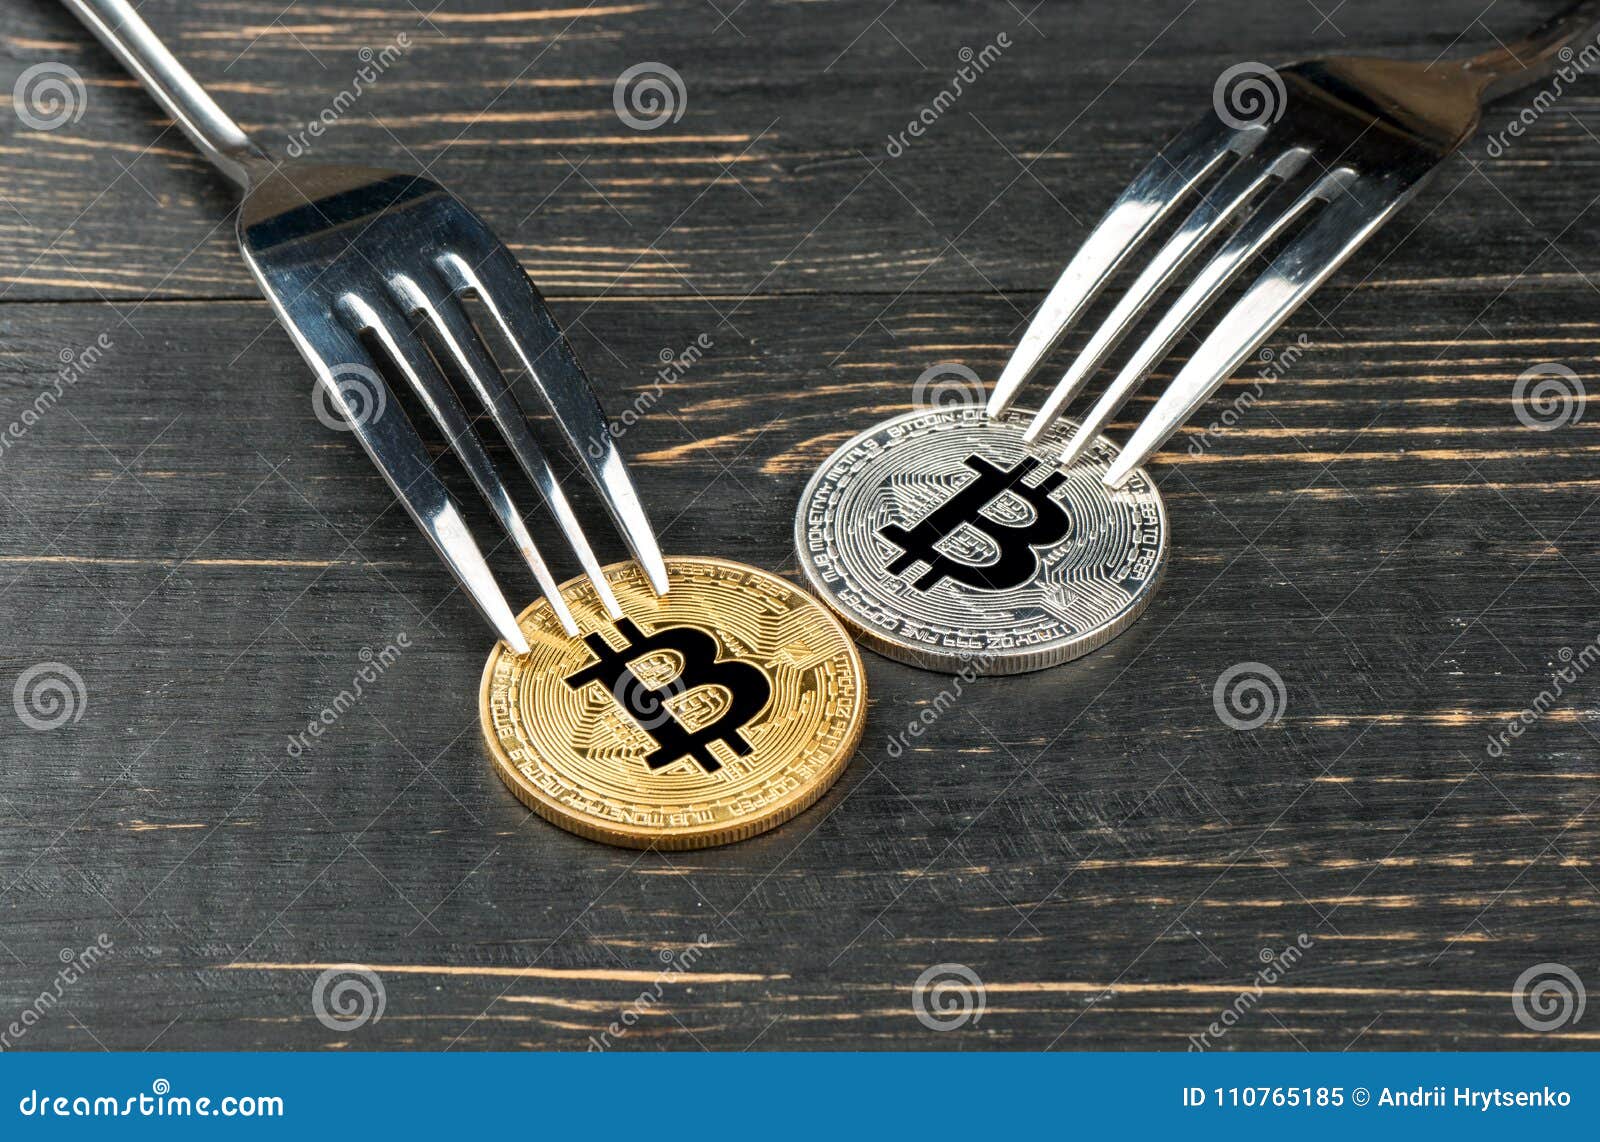 coin forks raise crypto prices